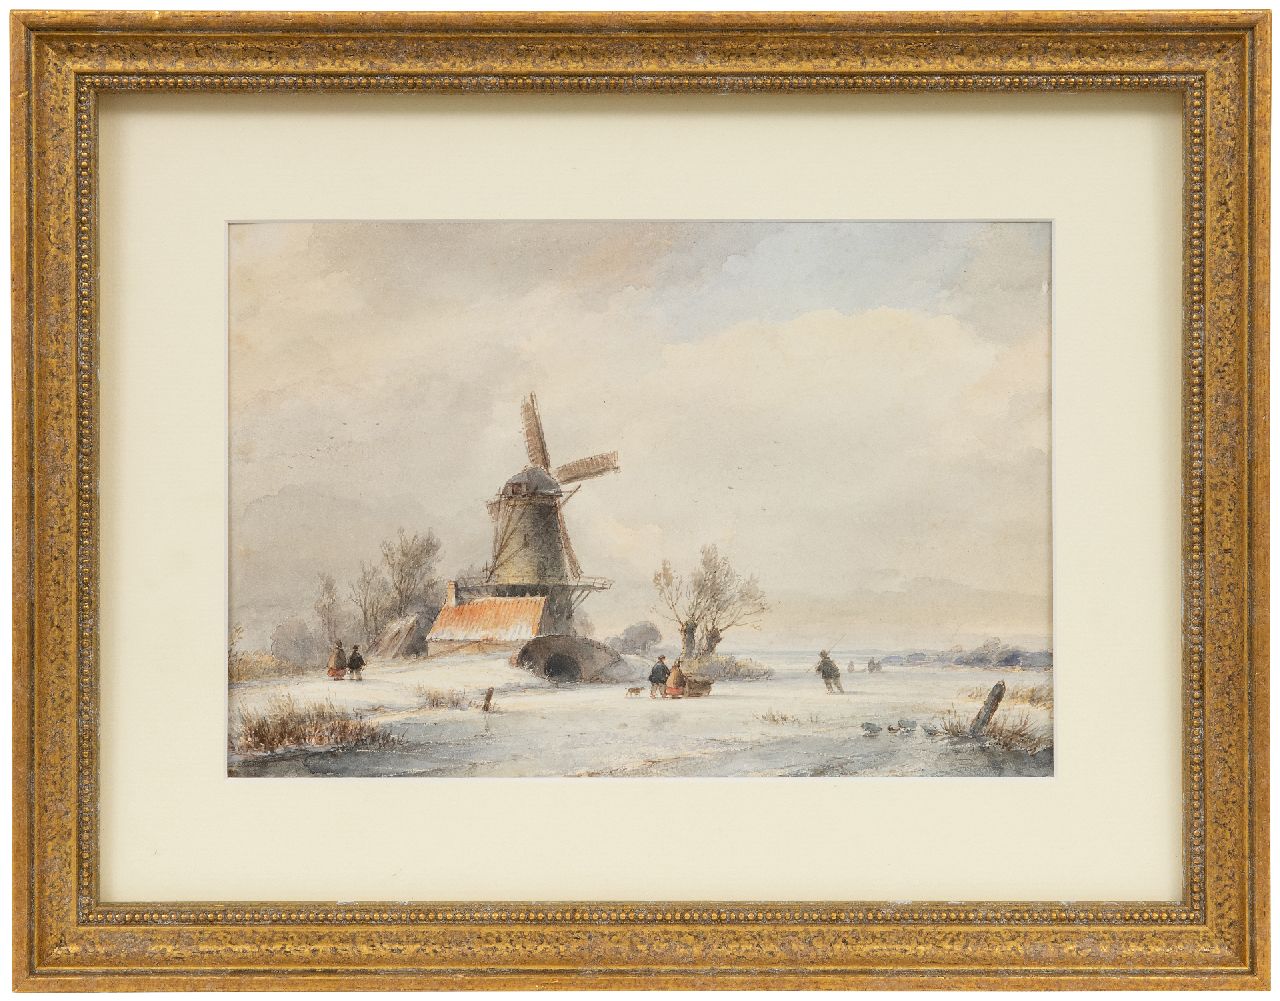 Kleijn L.J.  | Lodewijk Johannes Kleijn | Watercolours and drawings offered for sale | Snowy landscape with skater and sledge on a frozen river, watercolour on paper 17.6 x 26.4 cm, signed on the reverse